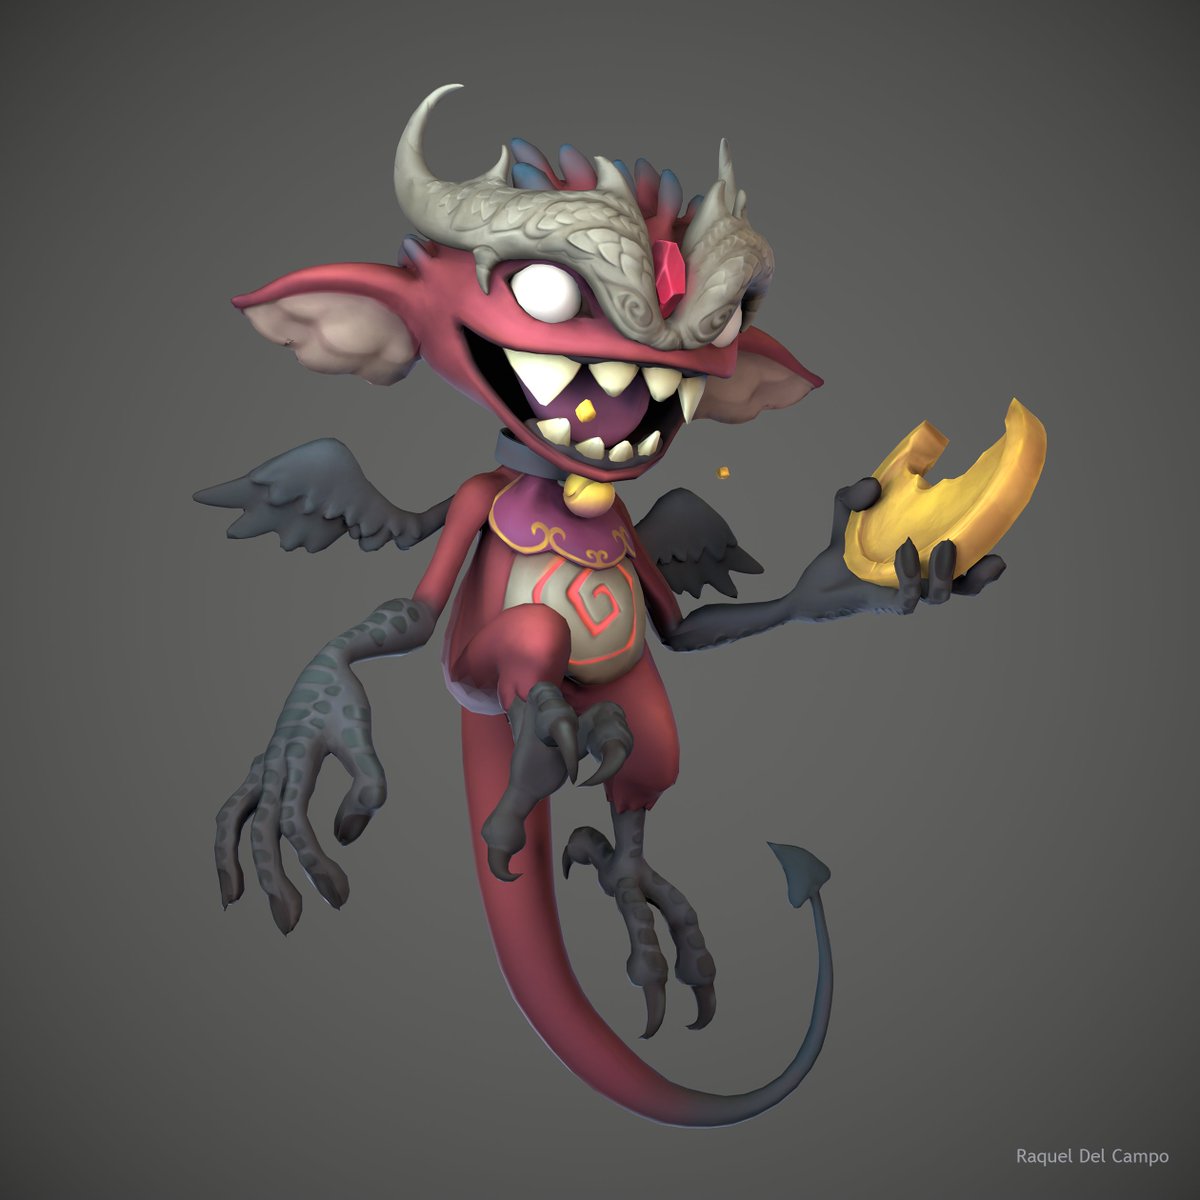 Finally finished this little demon model based on the awesome concept by @justinchans